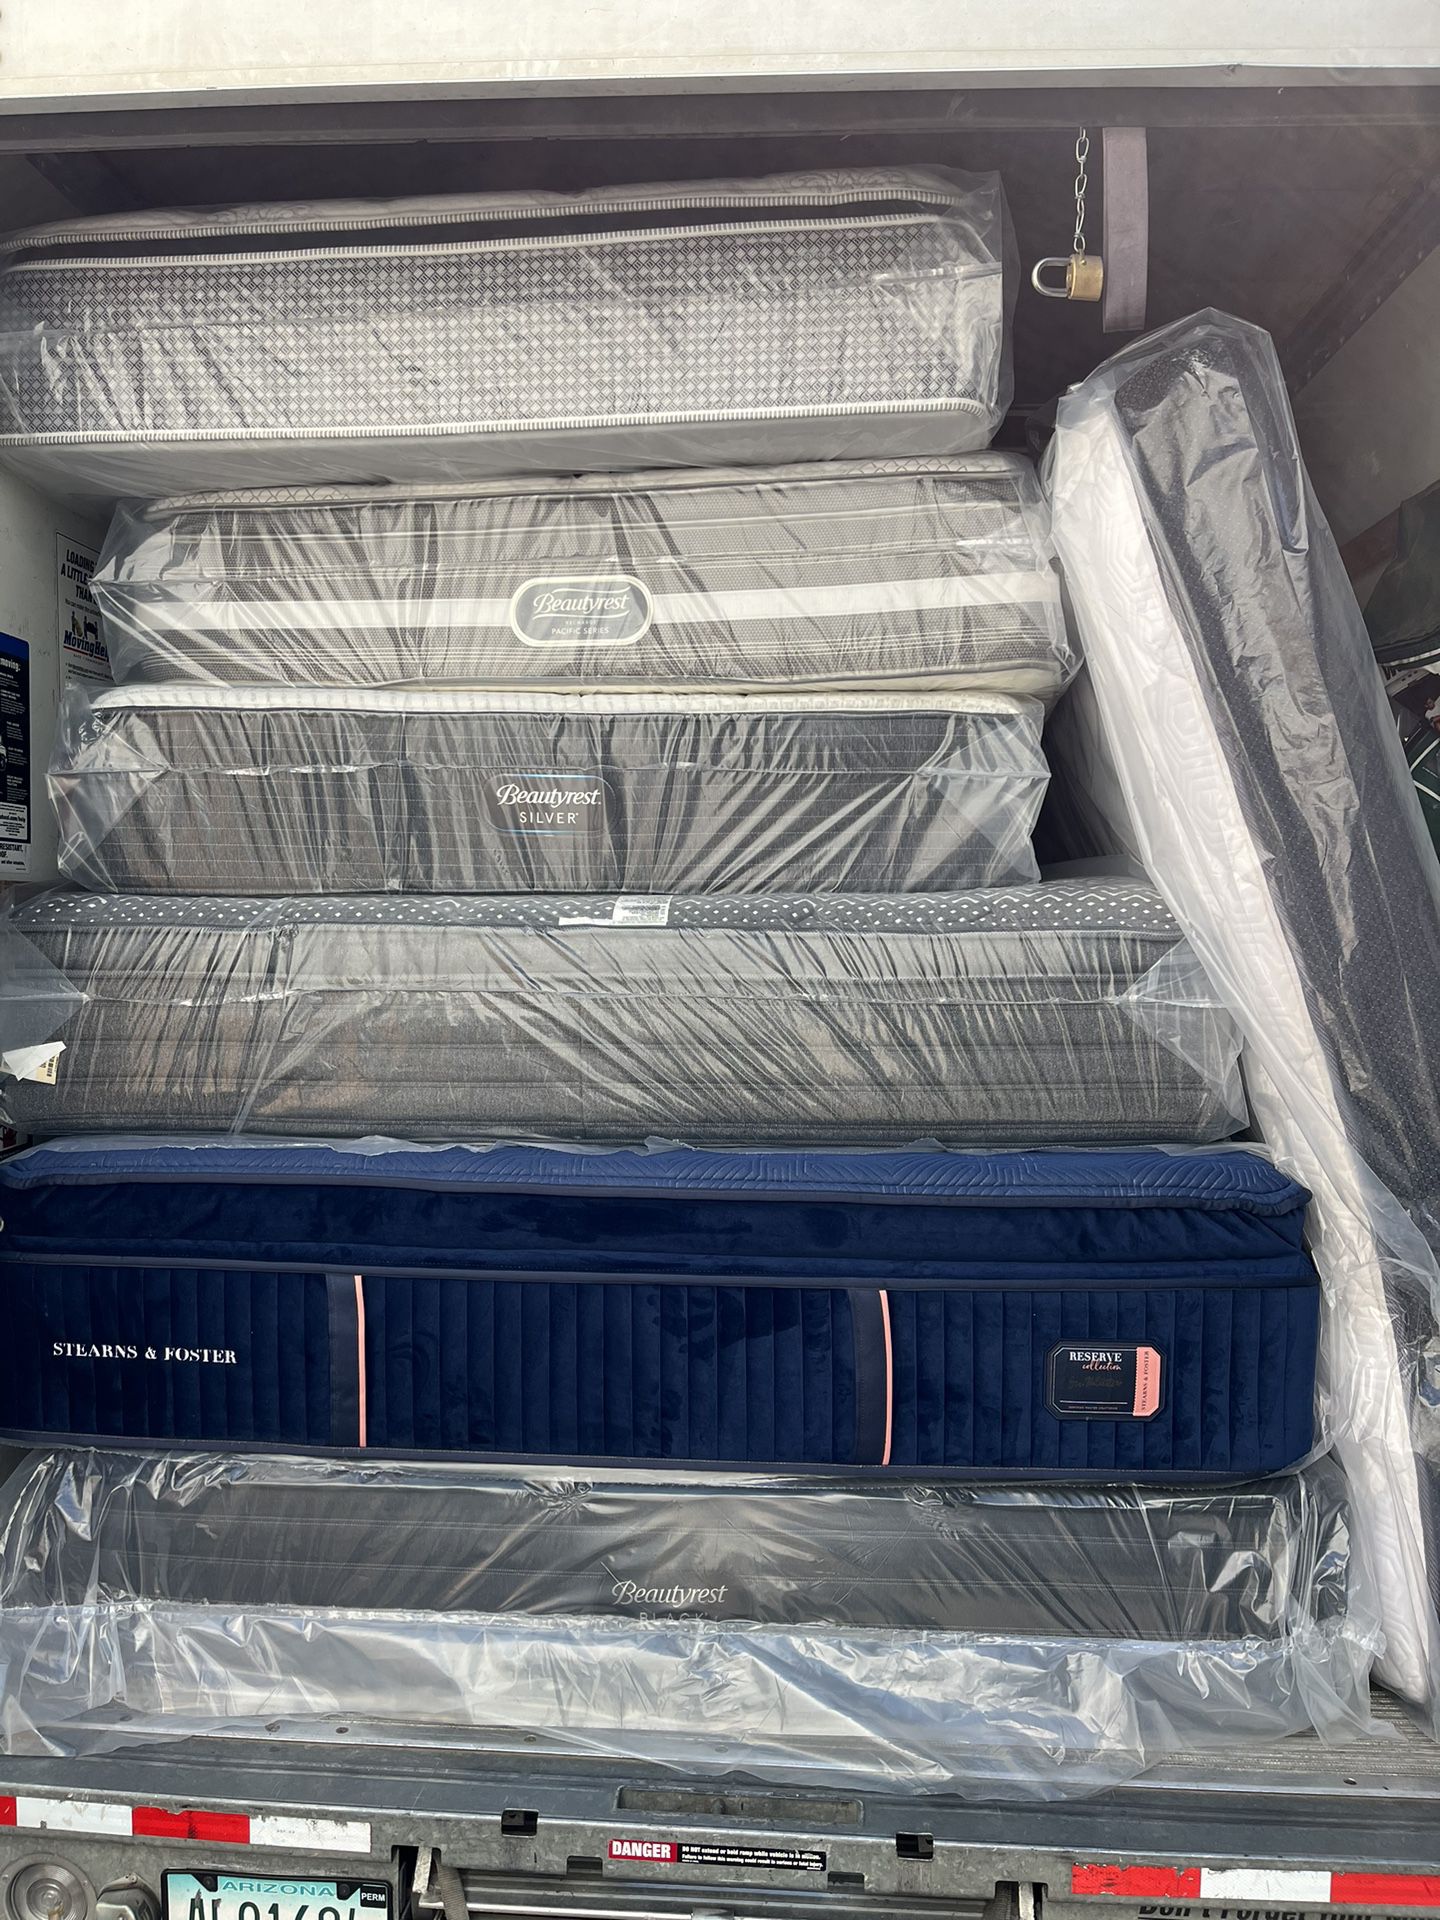 New Inventory!! $10 Down Take Now! Mattress Sale!